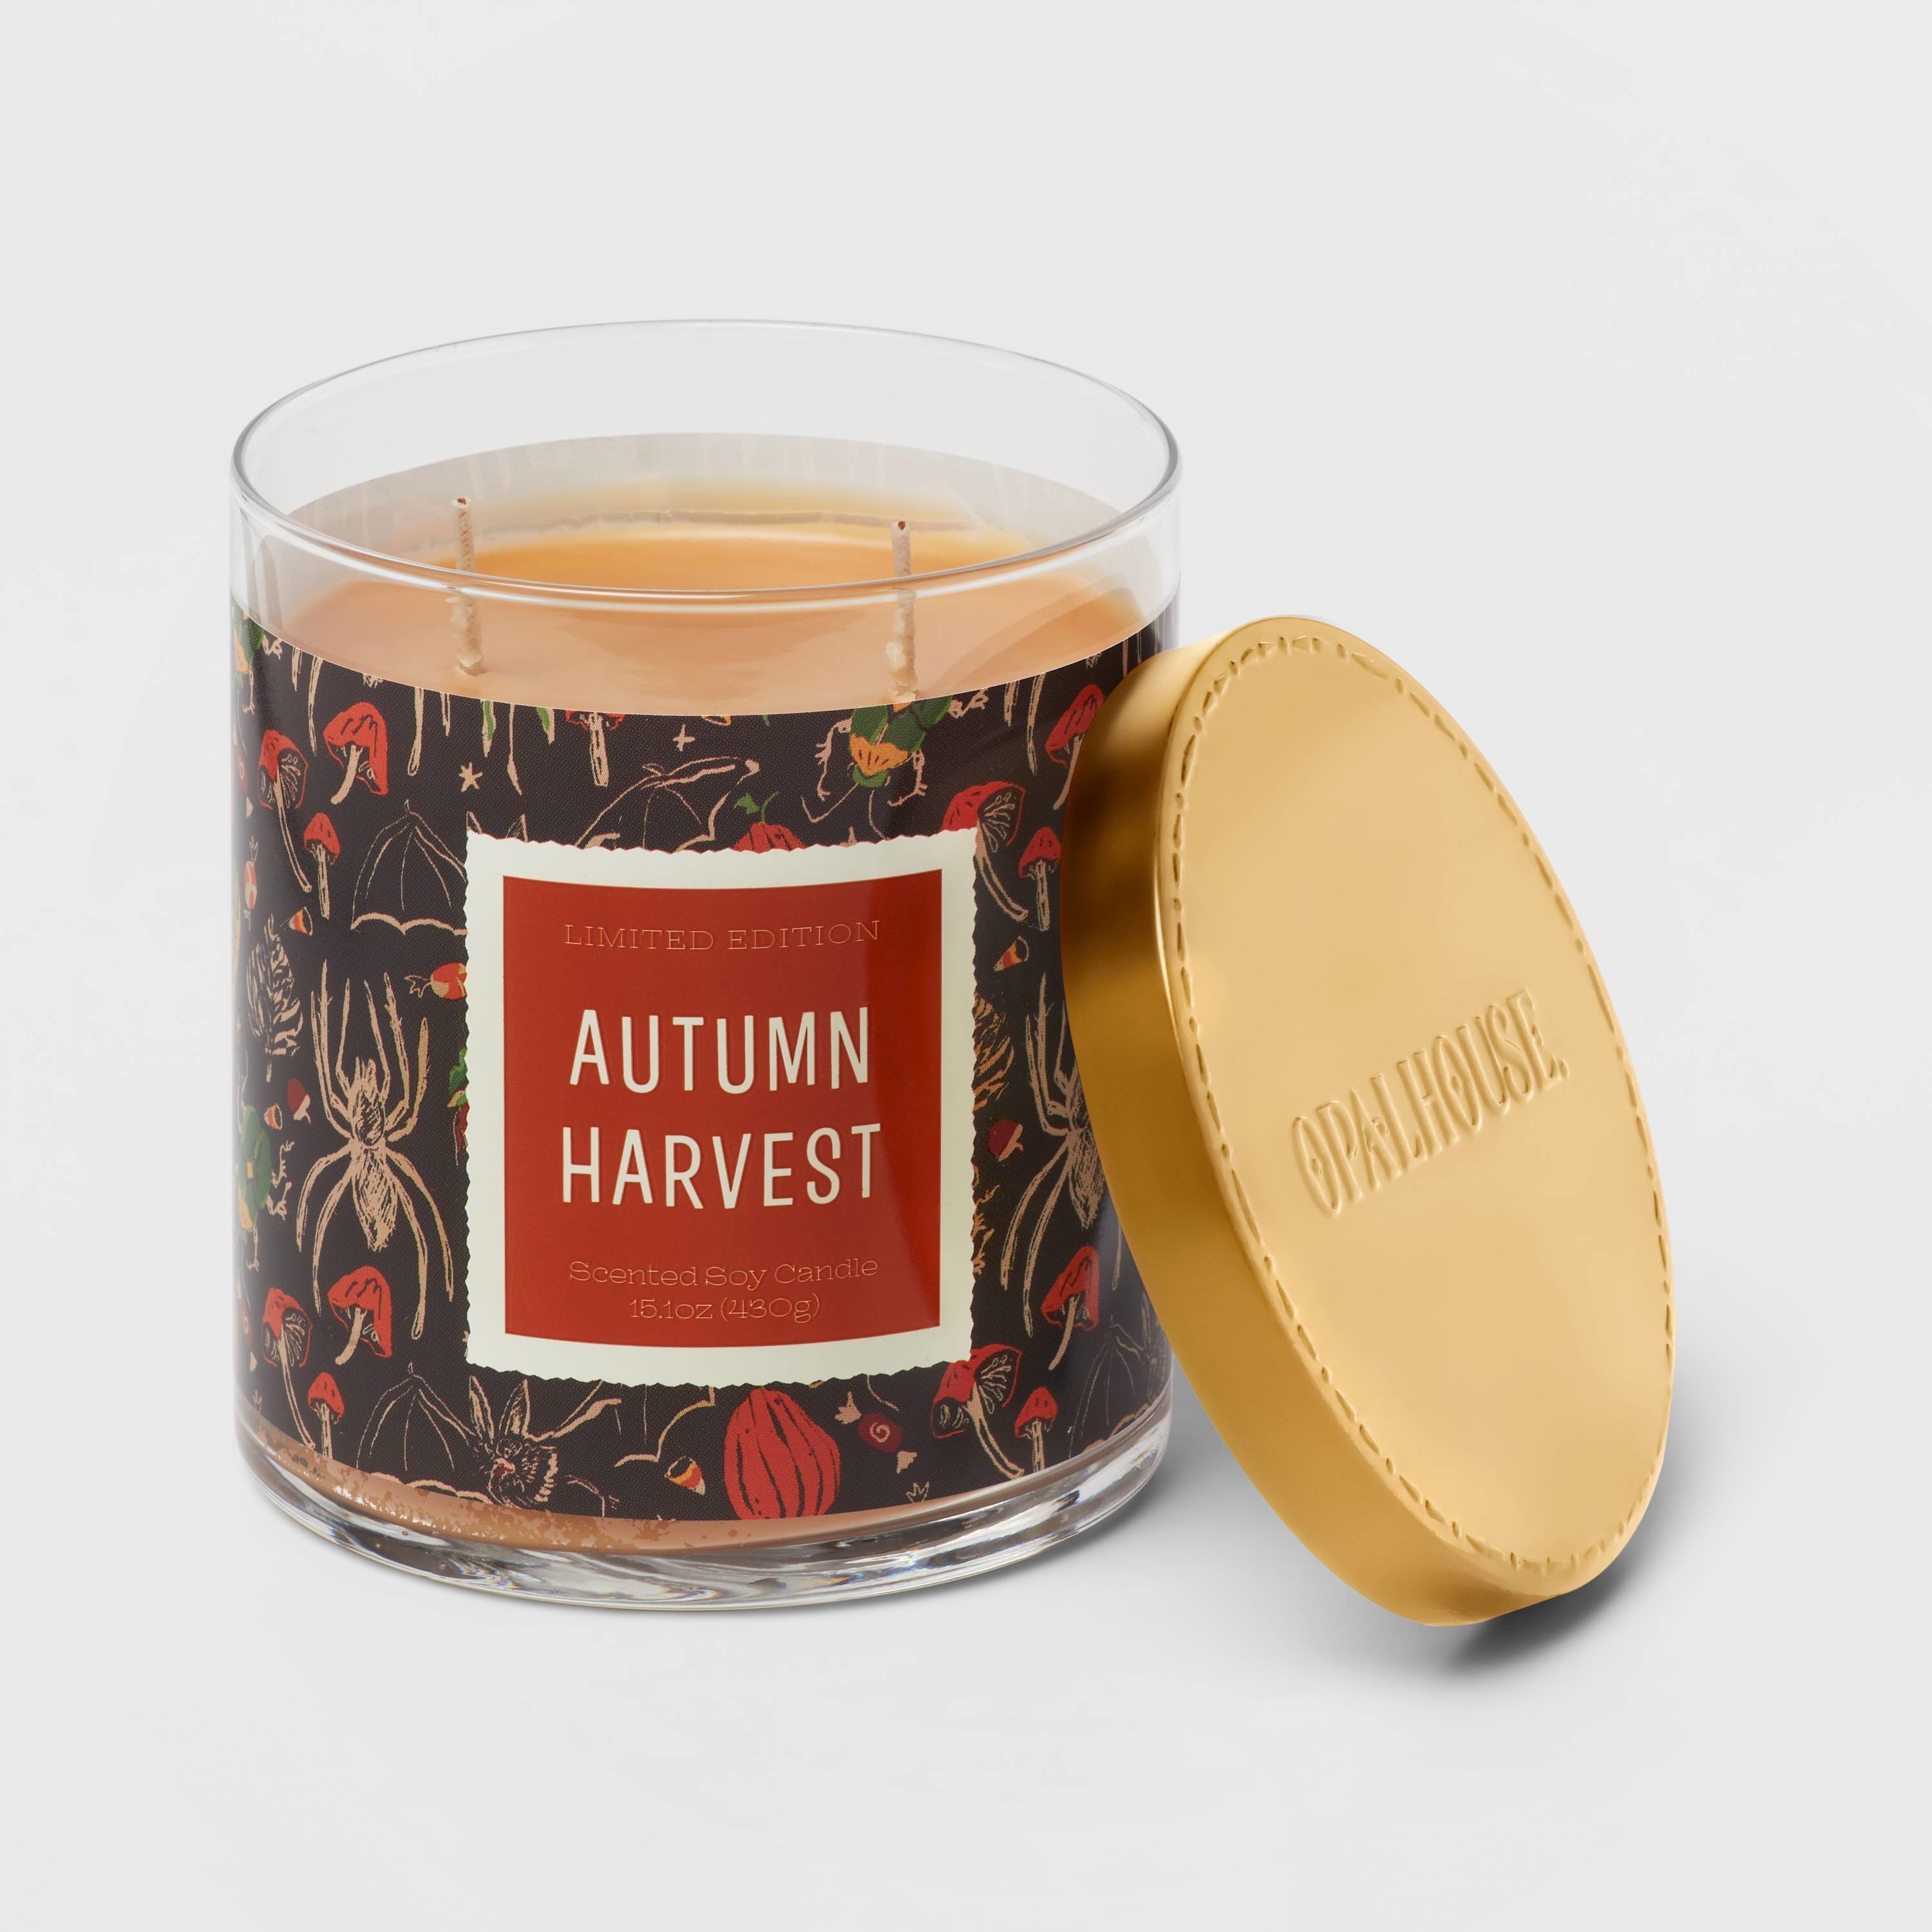 the autumn harvest candle